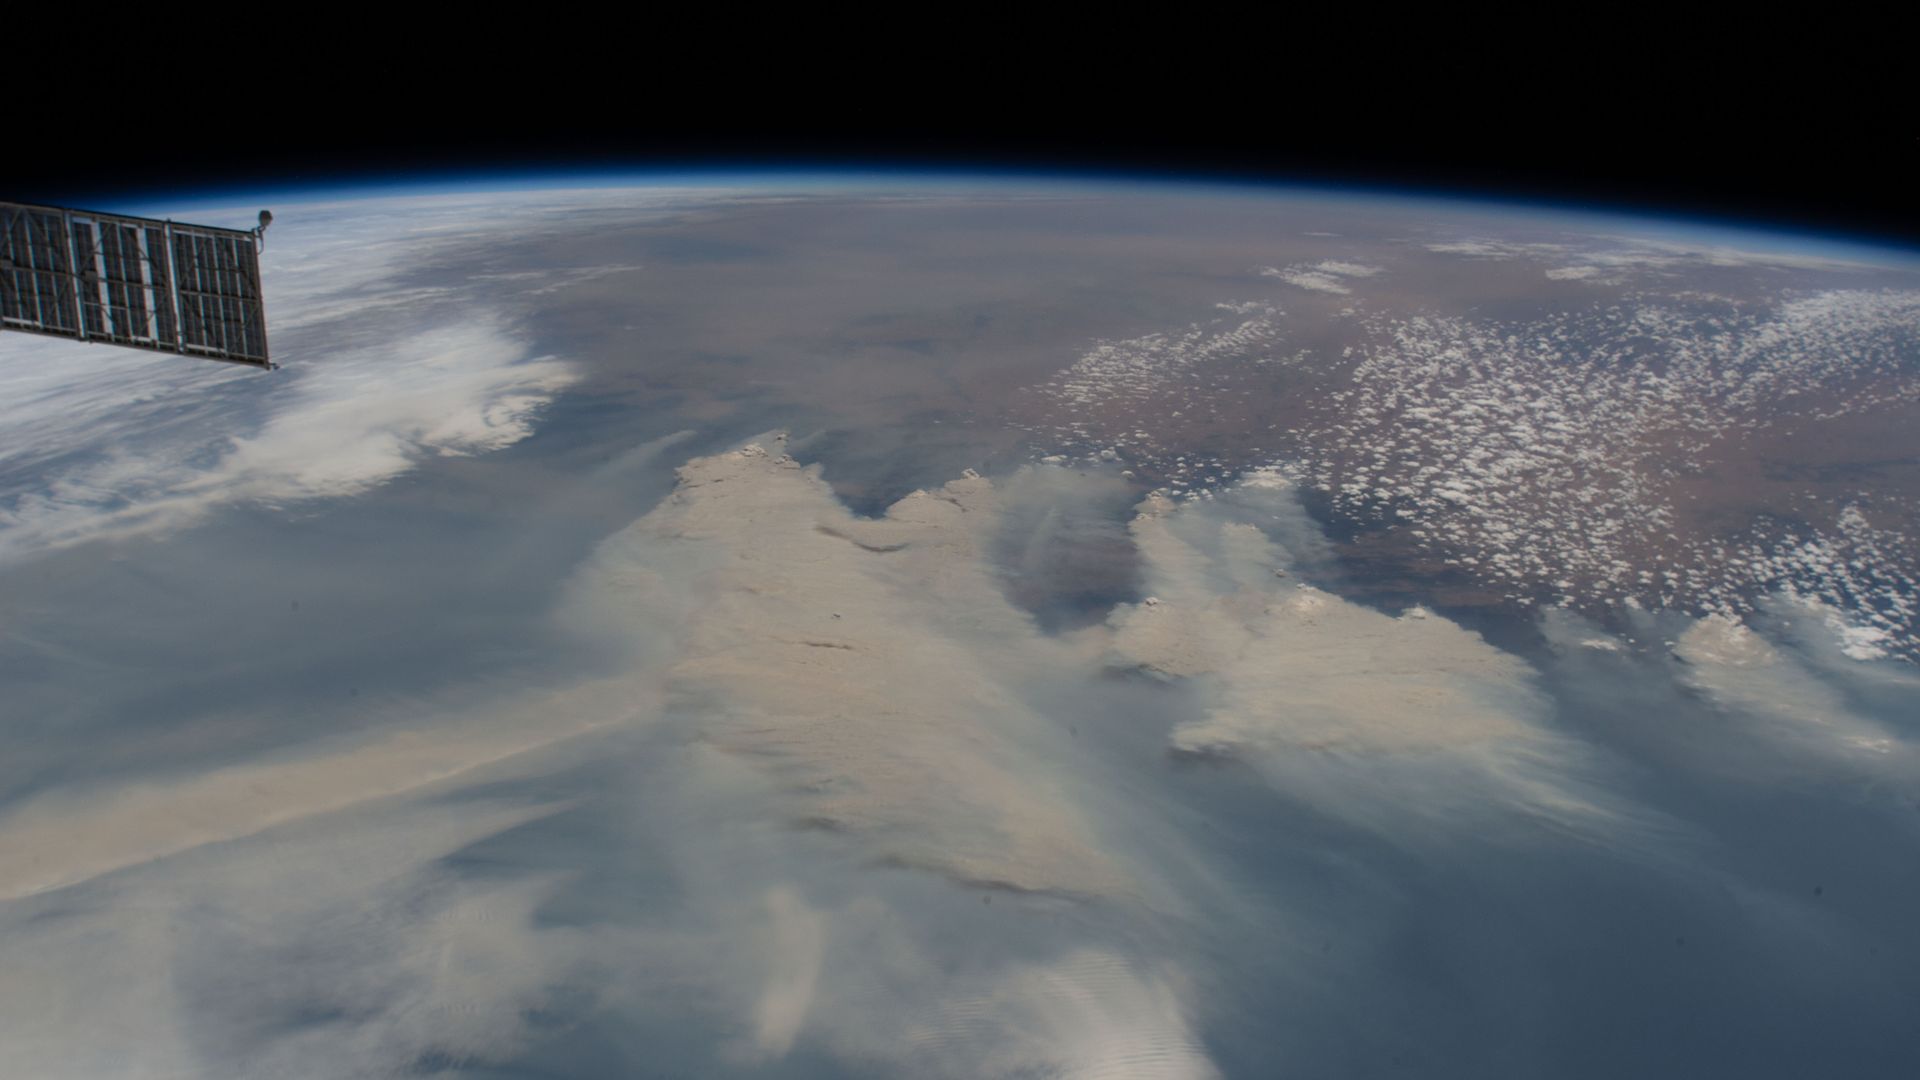 Smoke above Australia as seen from the International Space Station